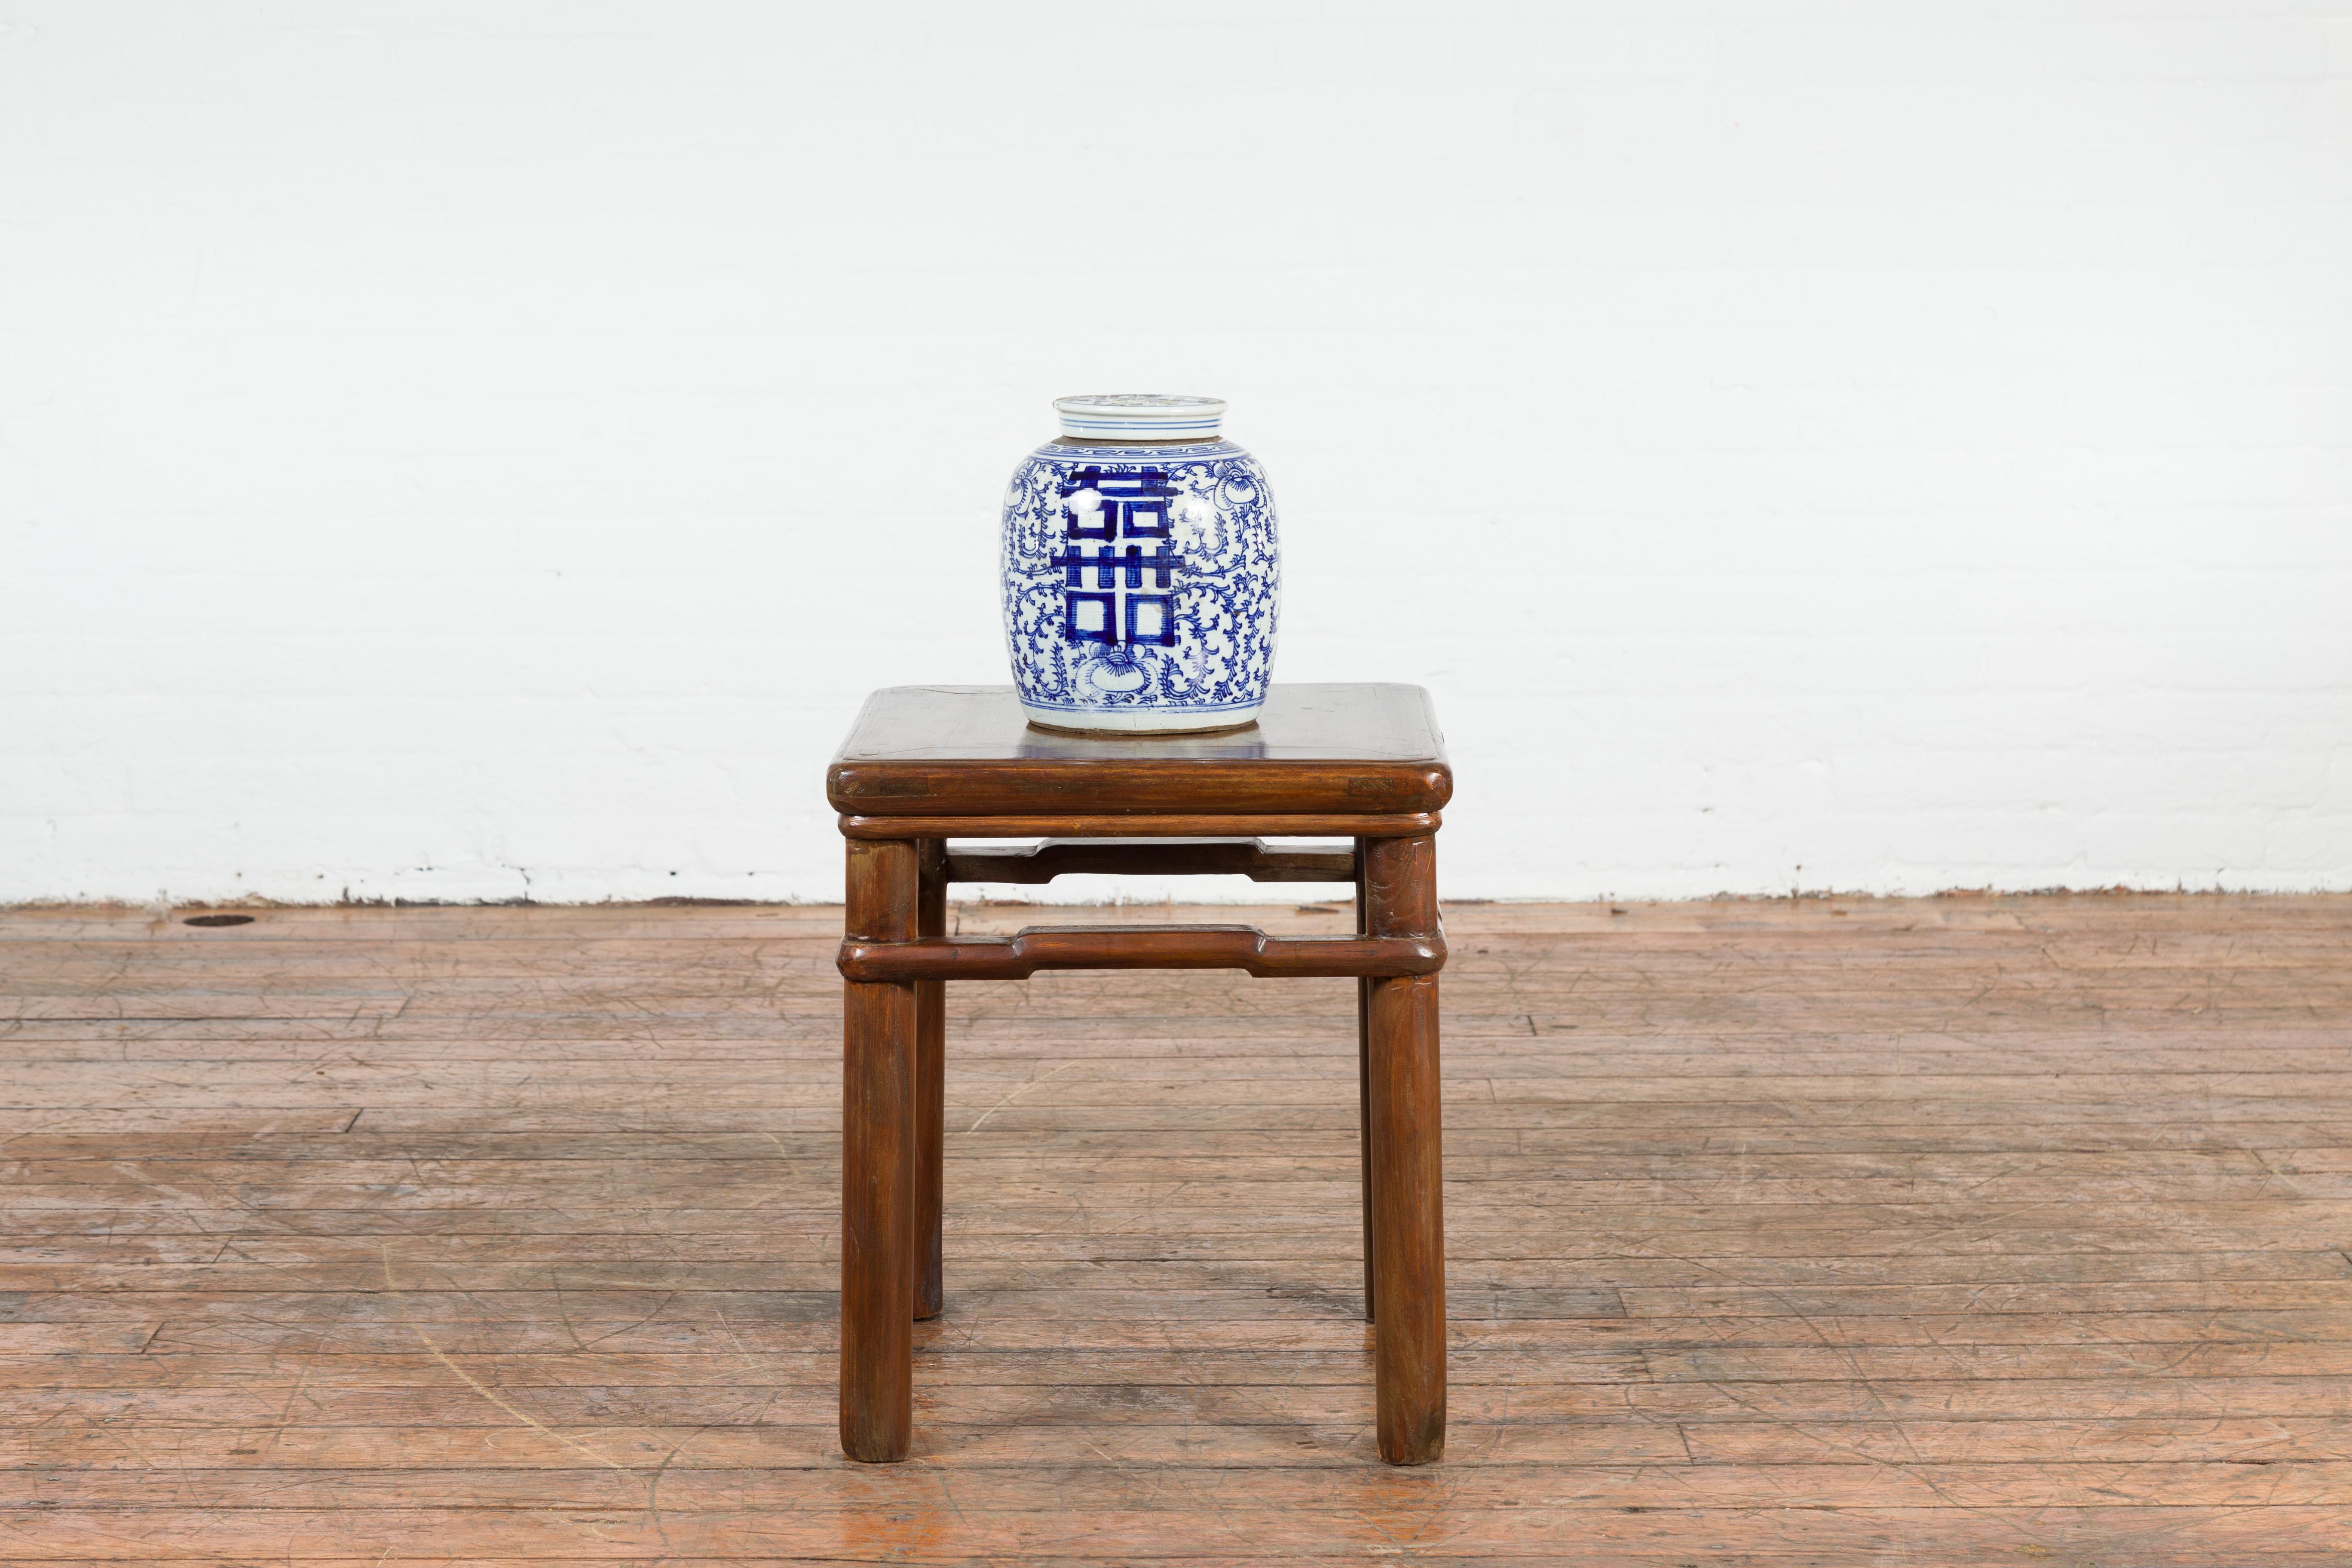 Chinese Qing Dynasty Period 19th Century Side Table with Humpback Stretchers For Sale 5